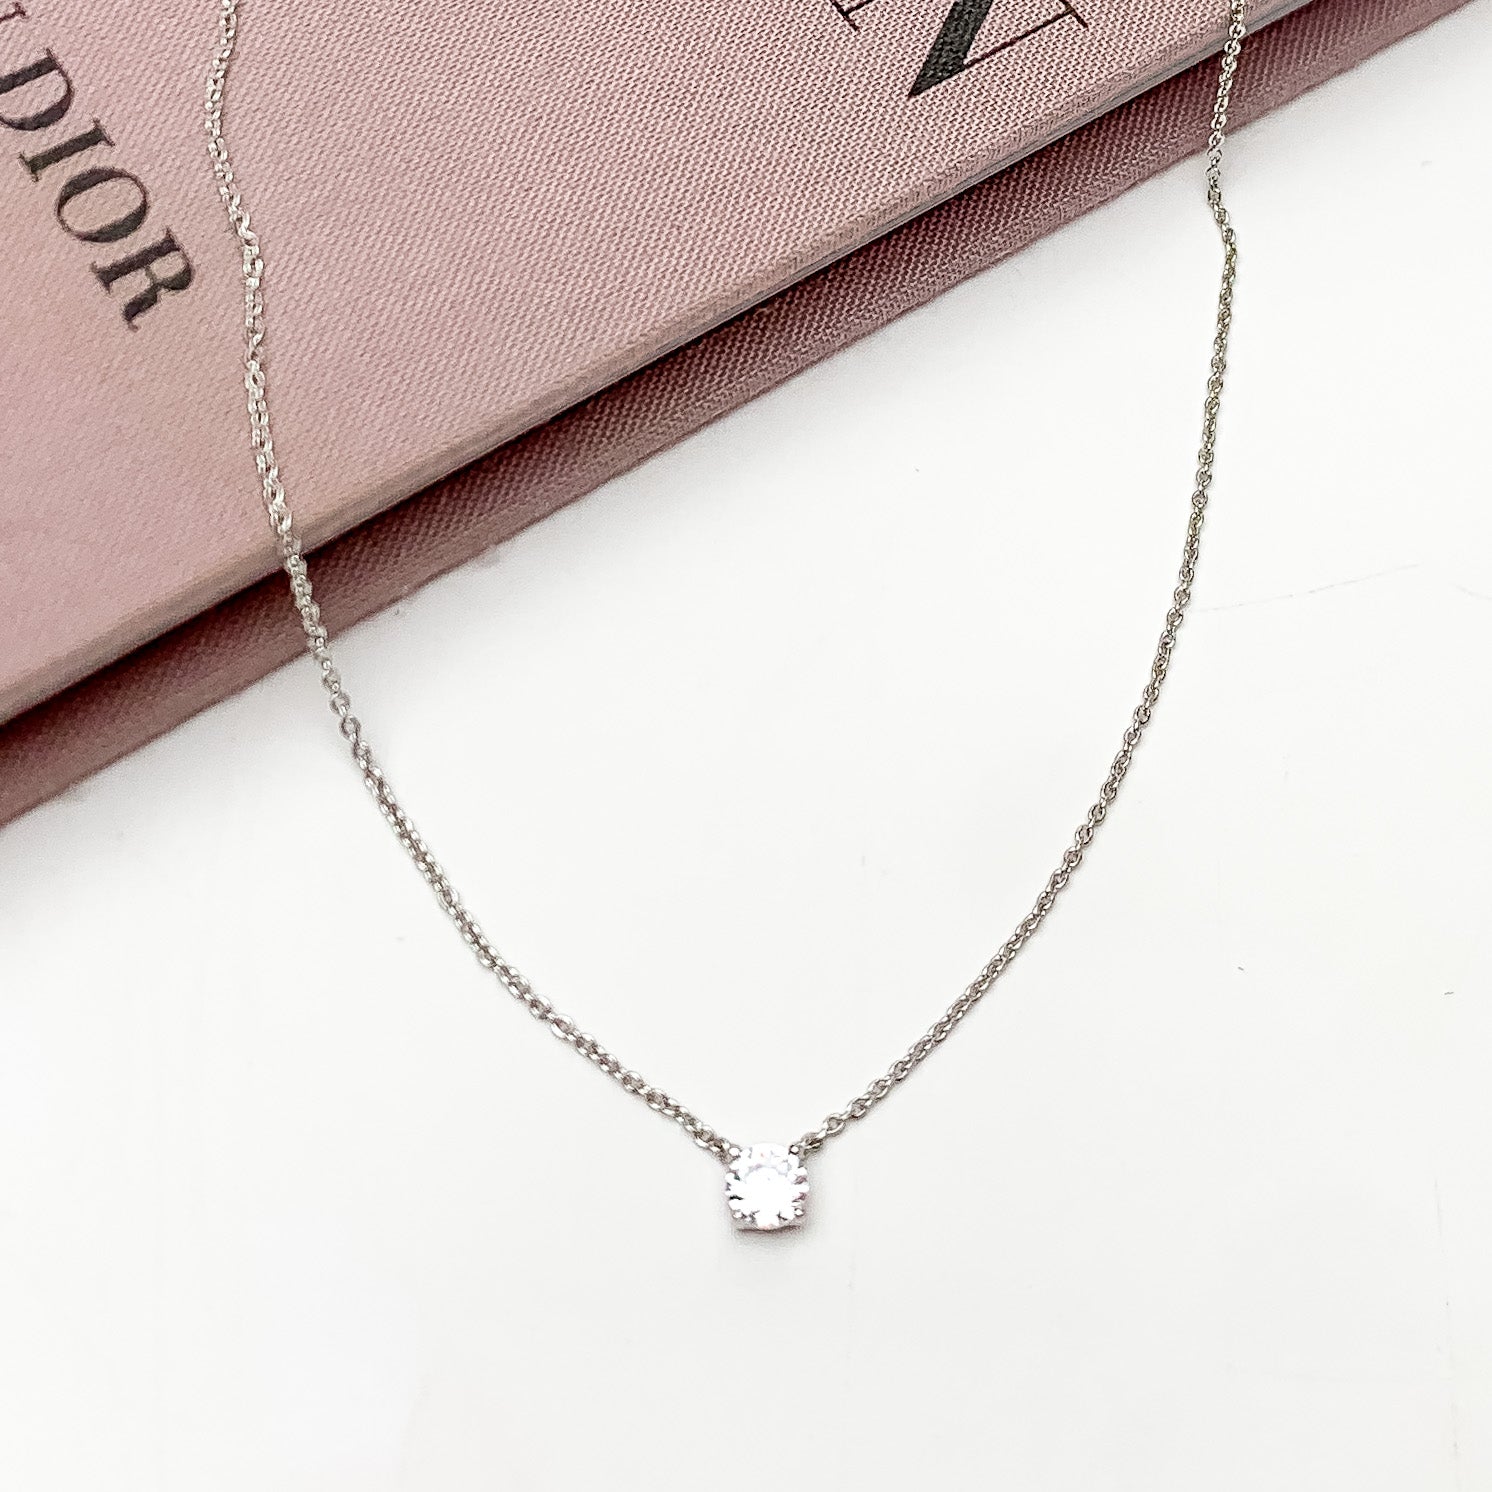 Silver Tone Simple Necklace With Clear Crystal. Pictured on a white background with the top of the necklace on a pink book.